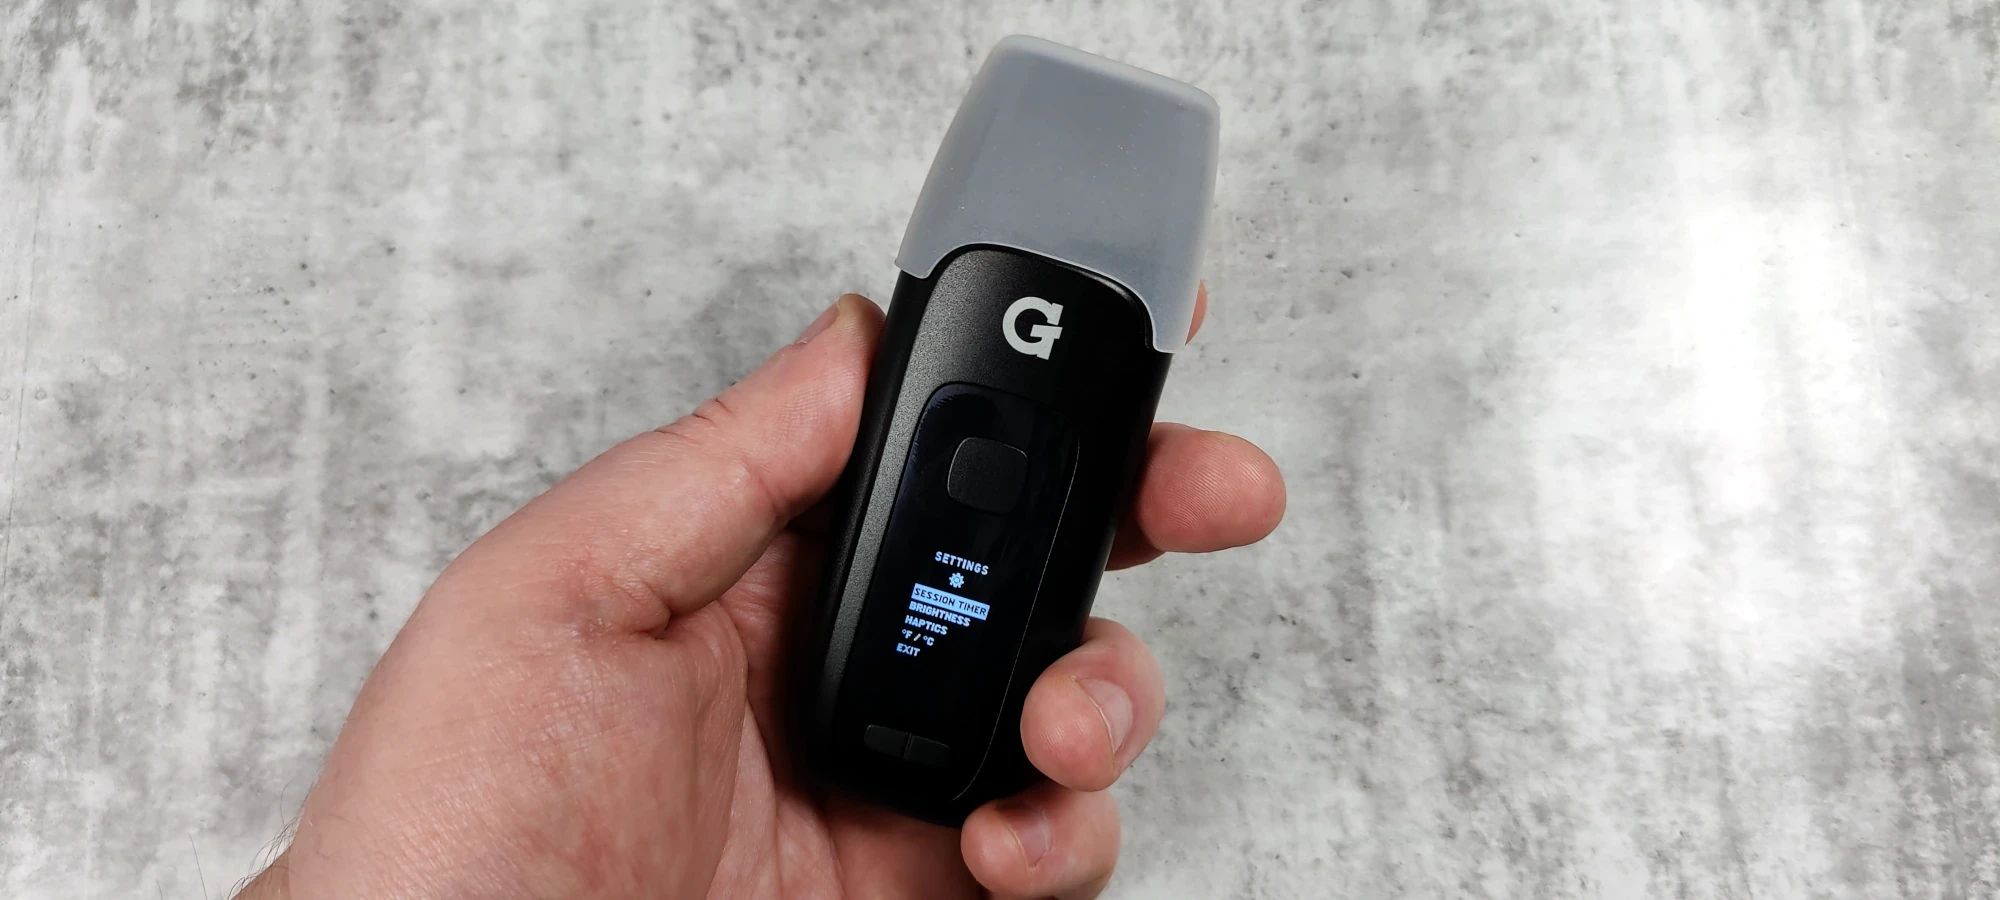 G Pen Dash+ with silicone mouthpiece cover on and settings menu open